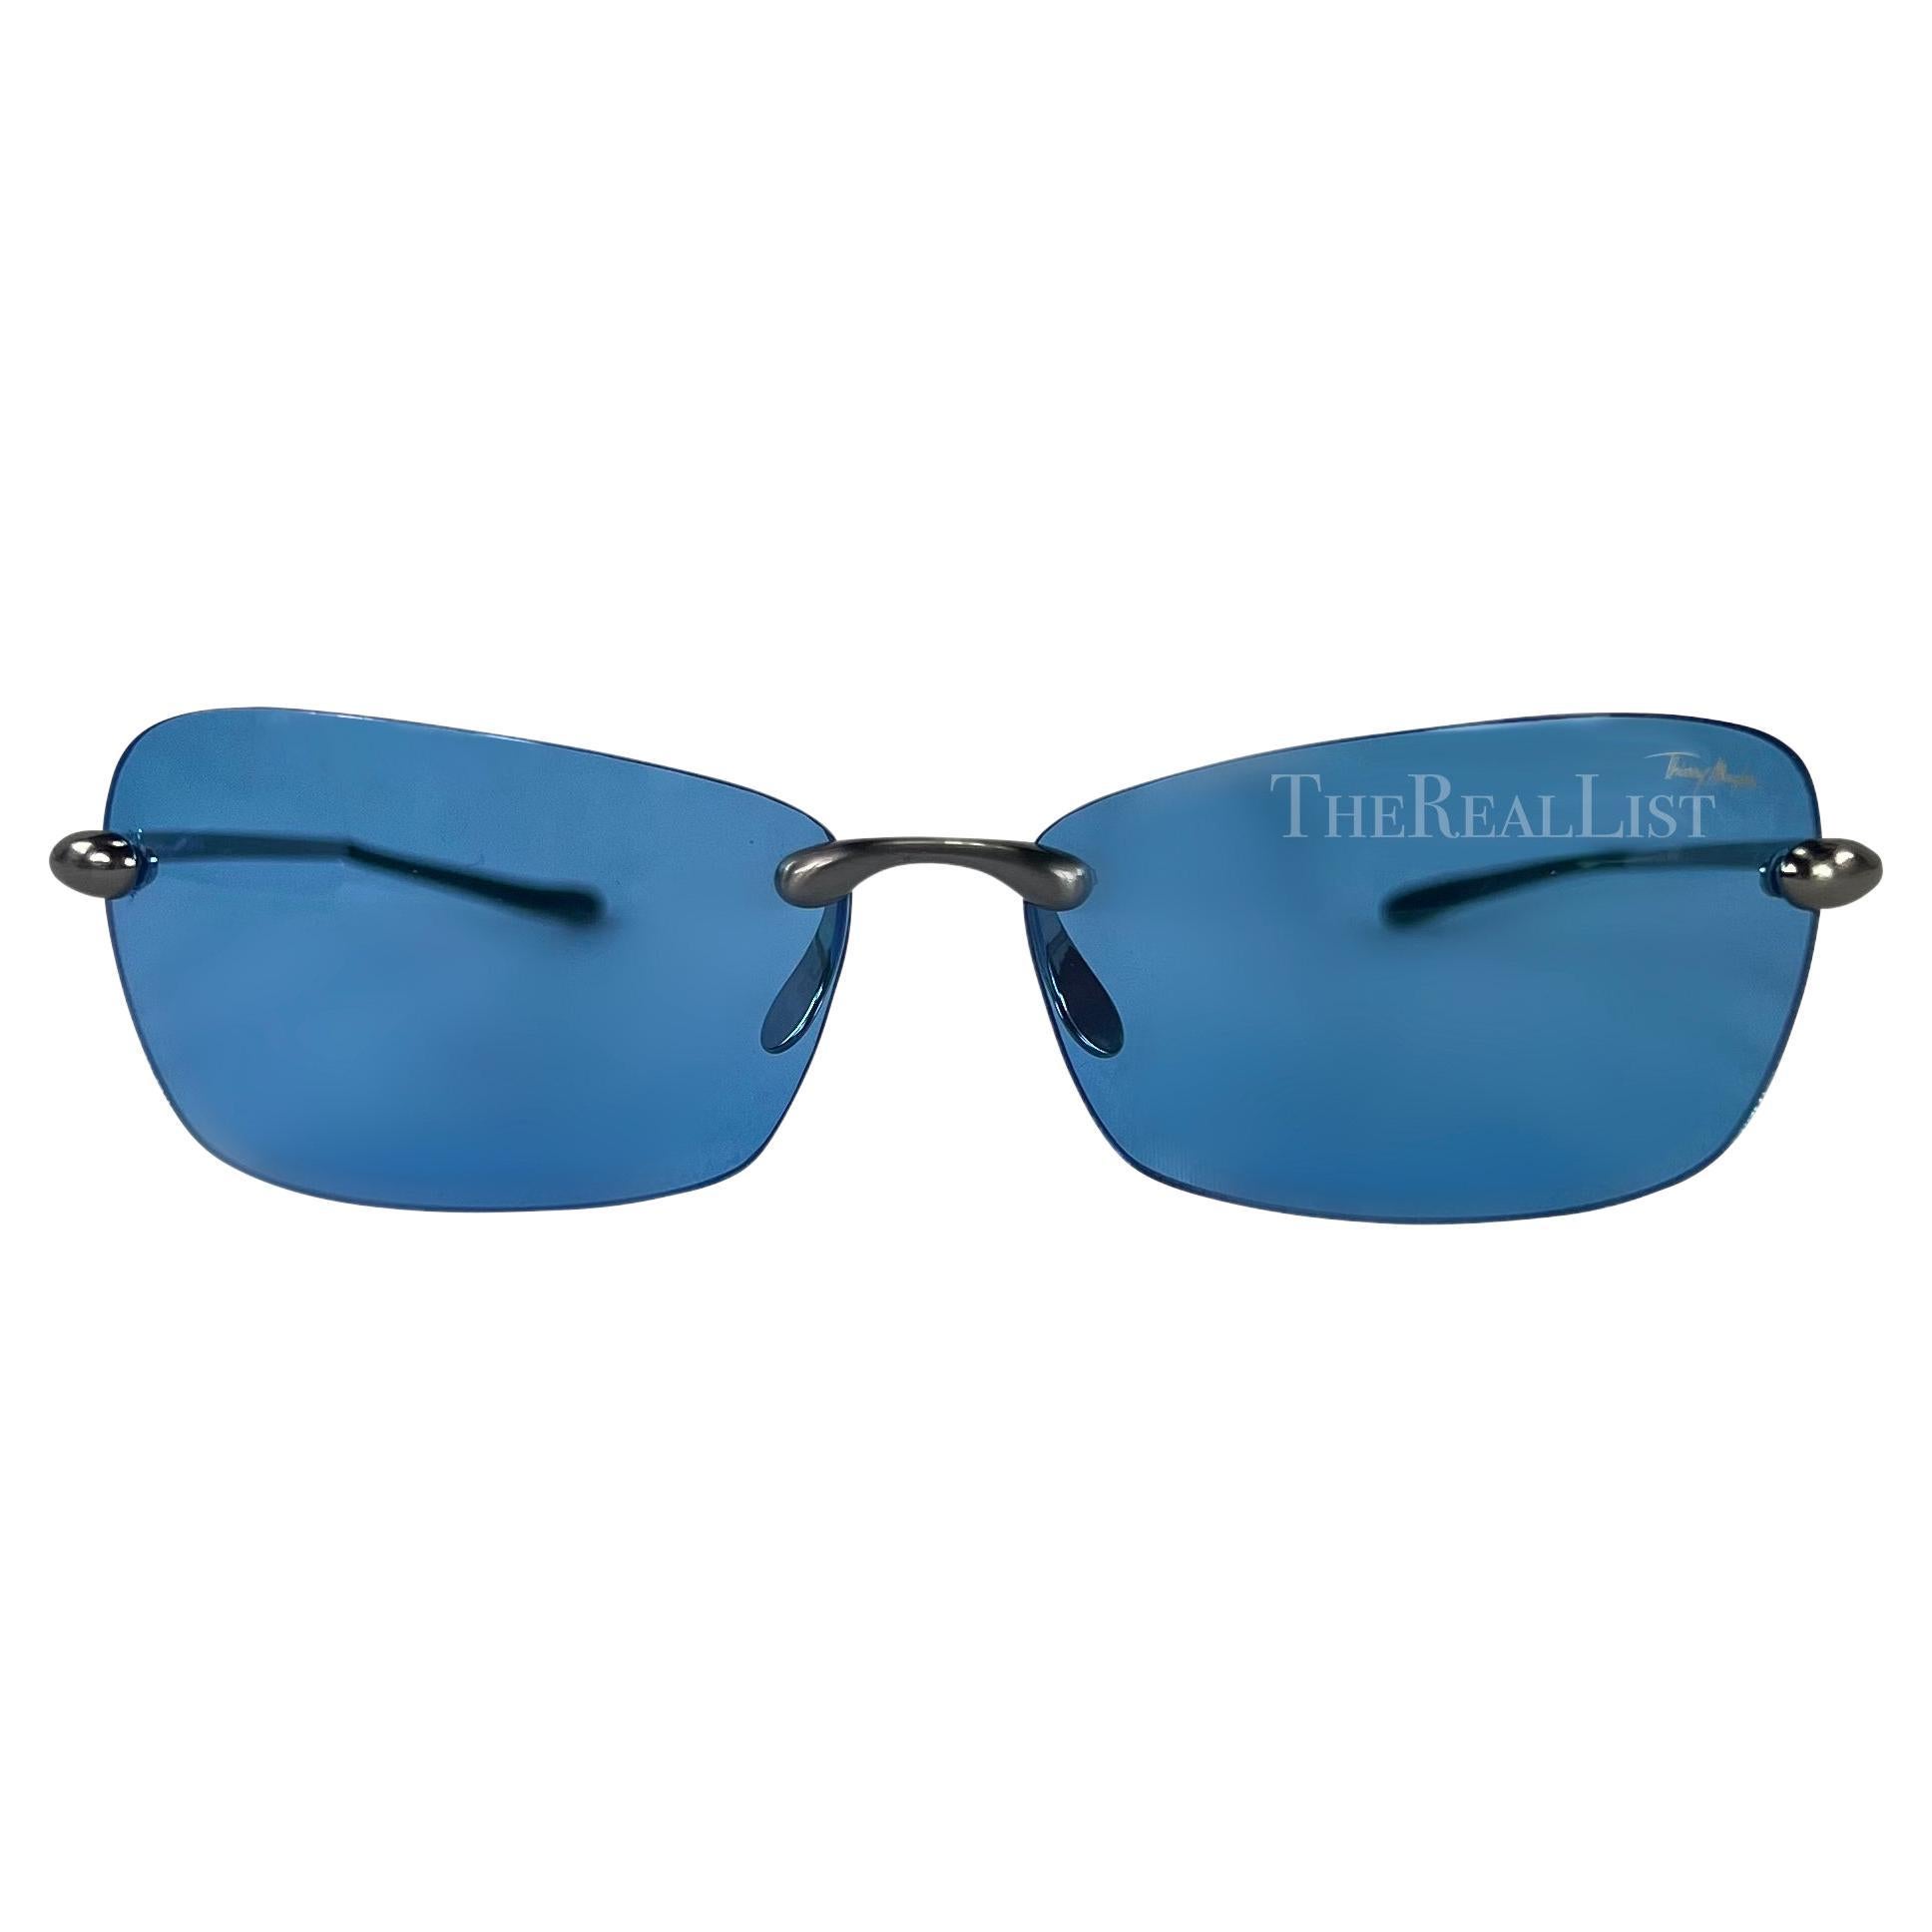 Presenting a pair of blue rimless Thierry Mugler sunglasses, designed by Manfred Mugler. From the early 2000s, these sunglasses feature rectangular lenses with a slight cat eye and are made complete with chrome metal arms.

Approximate